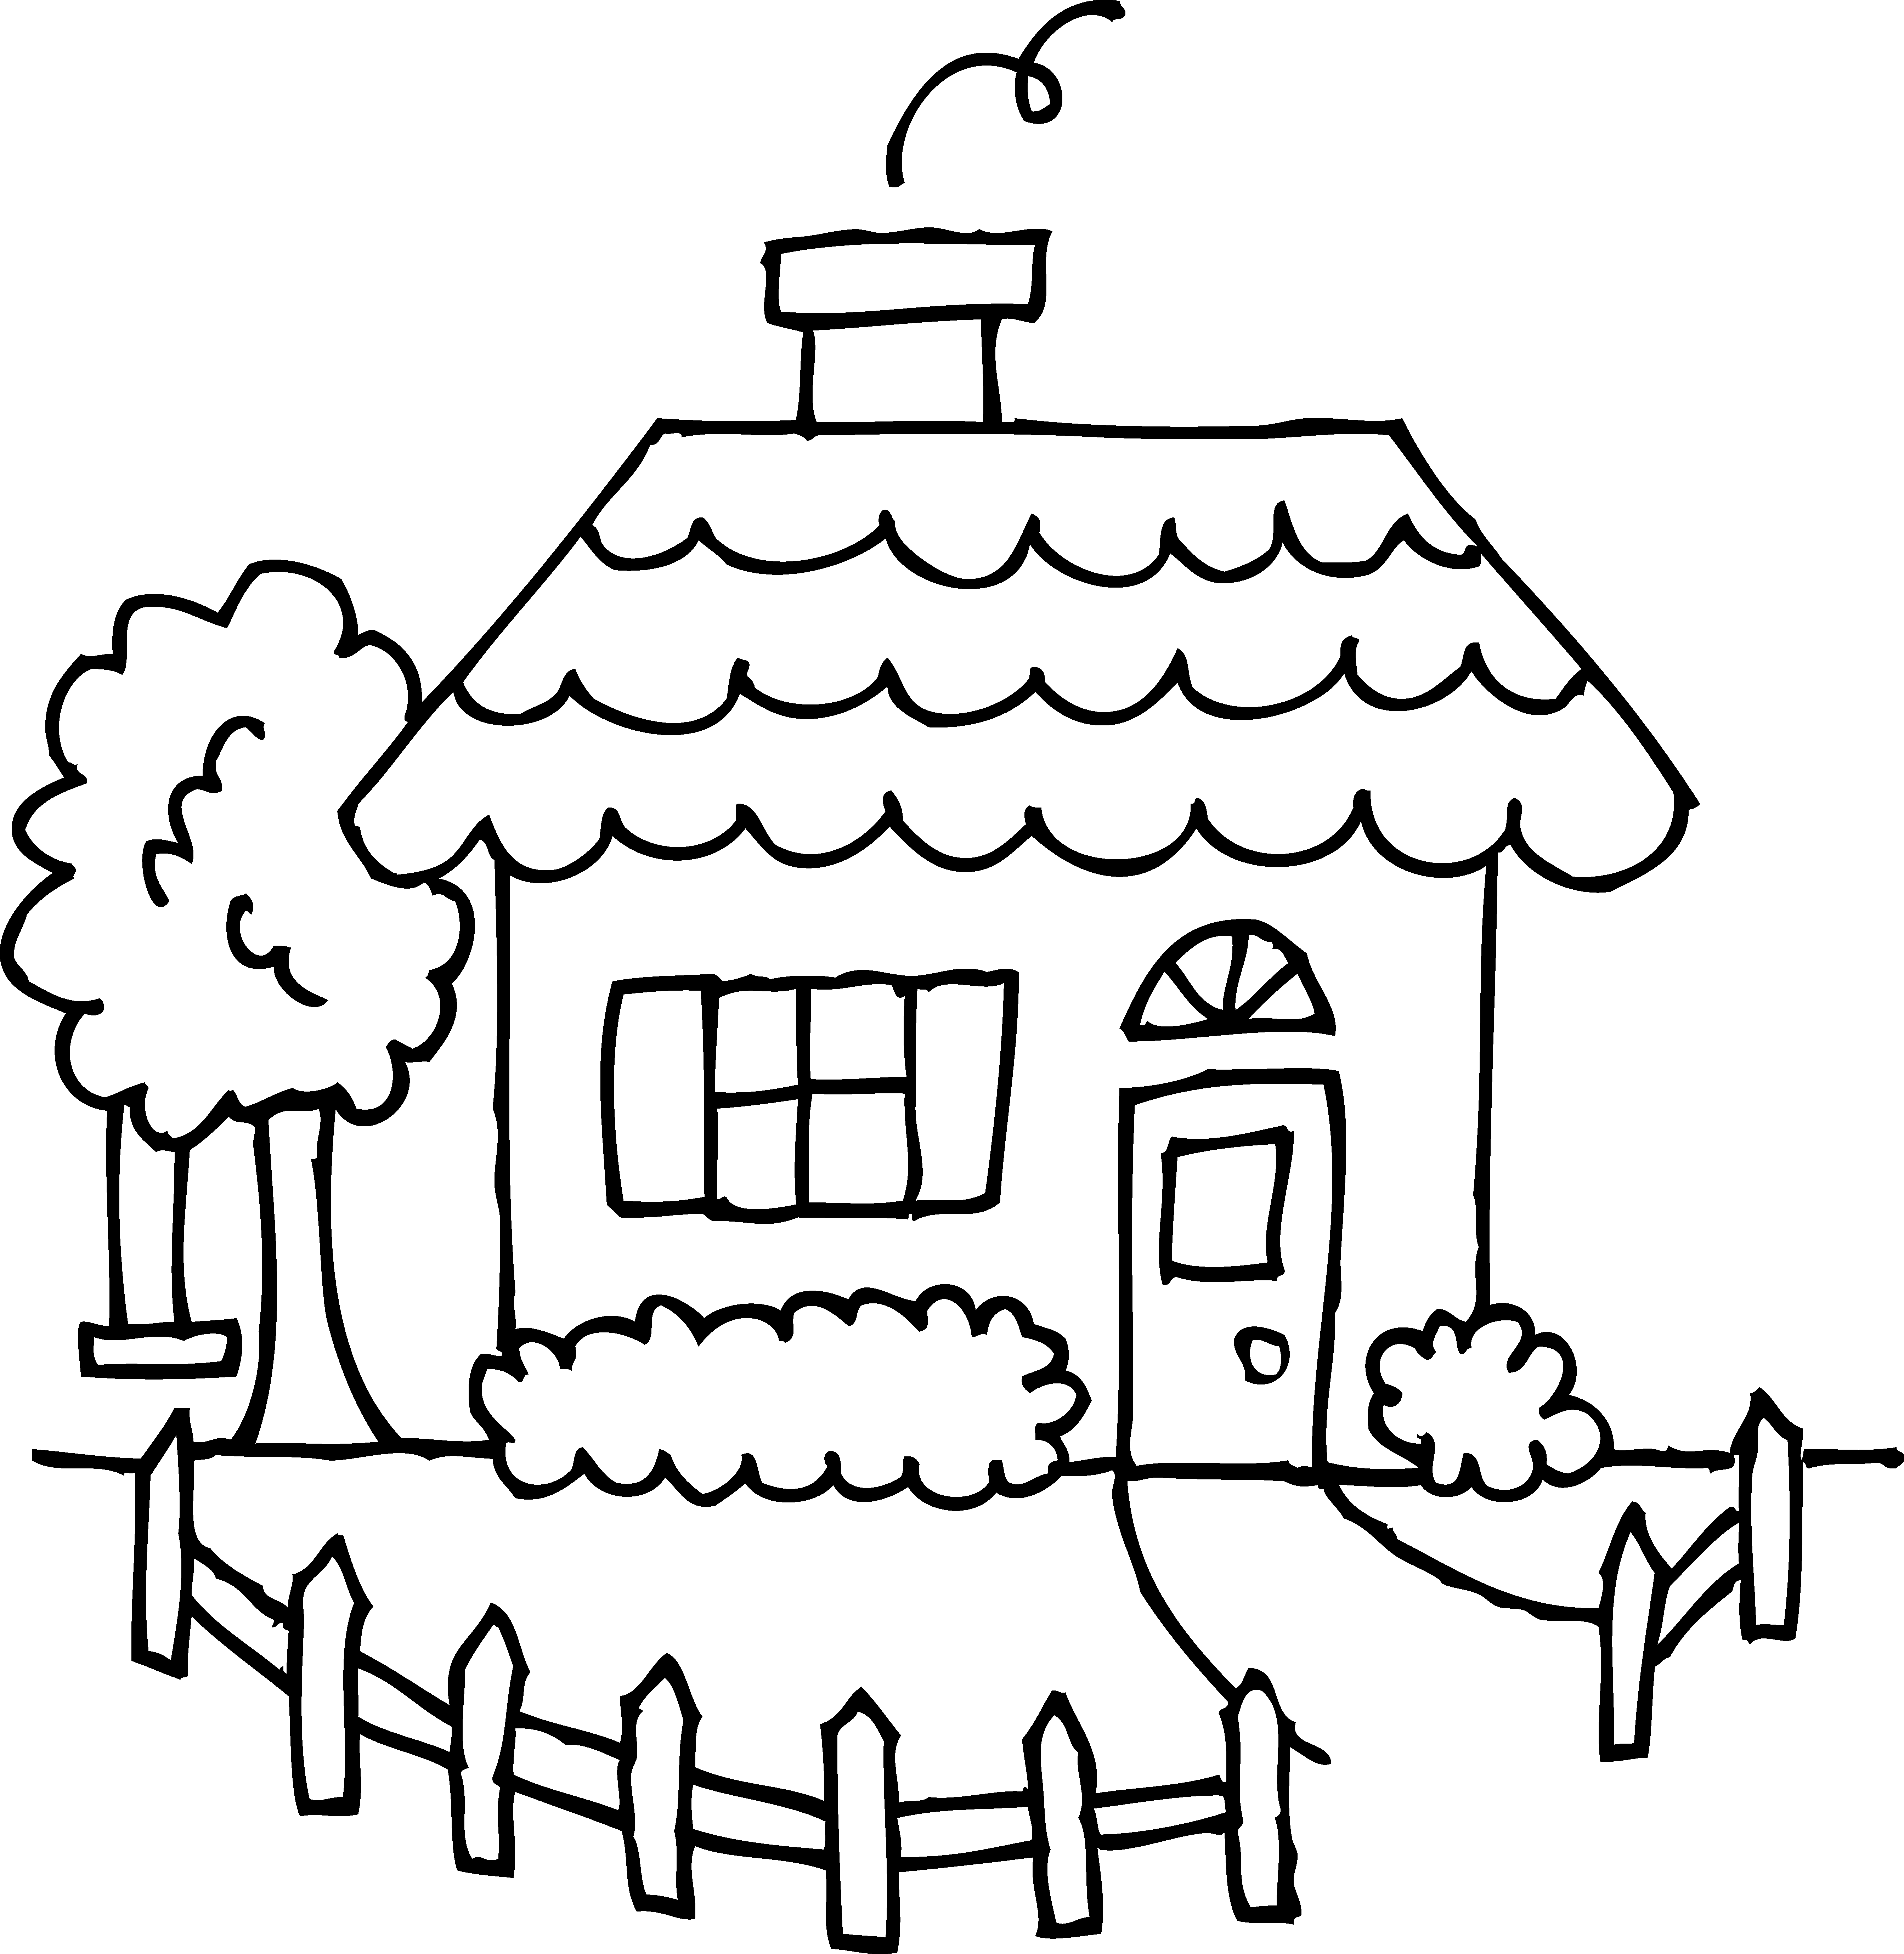 drawings of houses clipart - photo #37